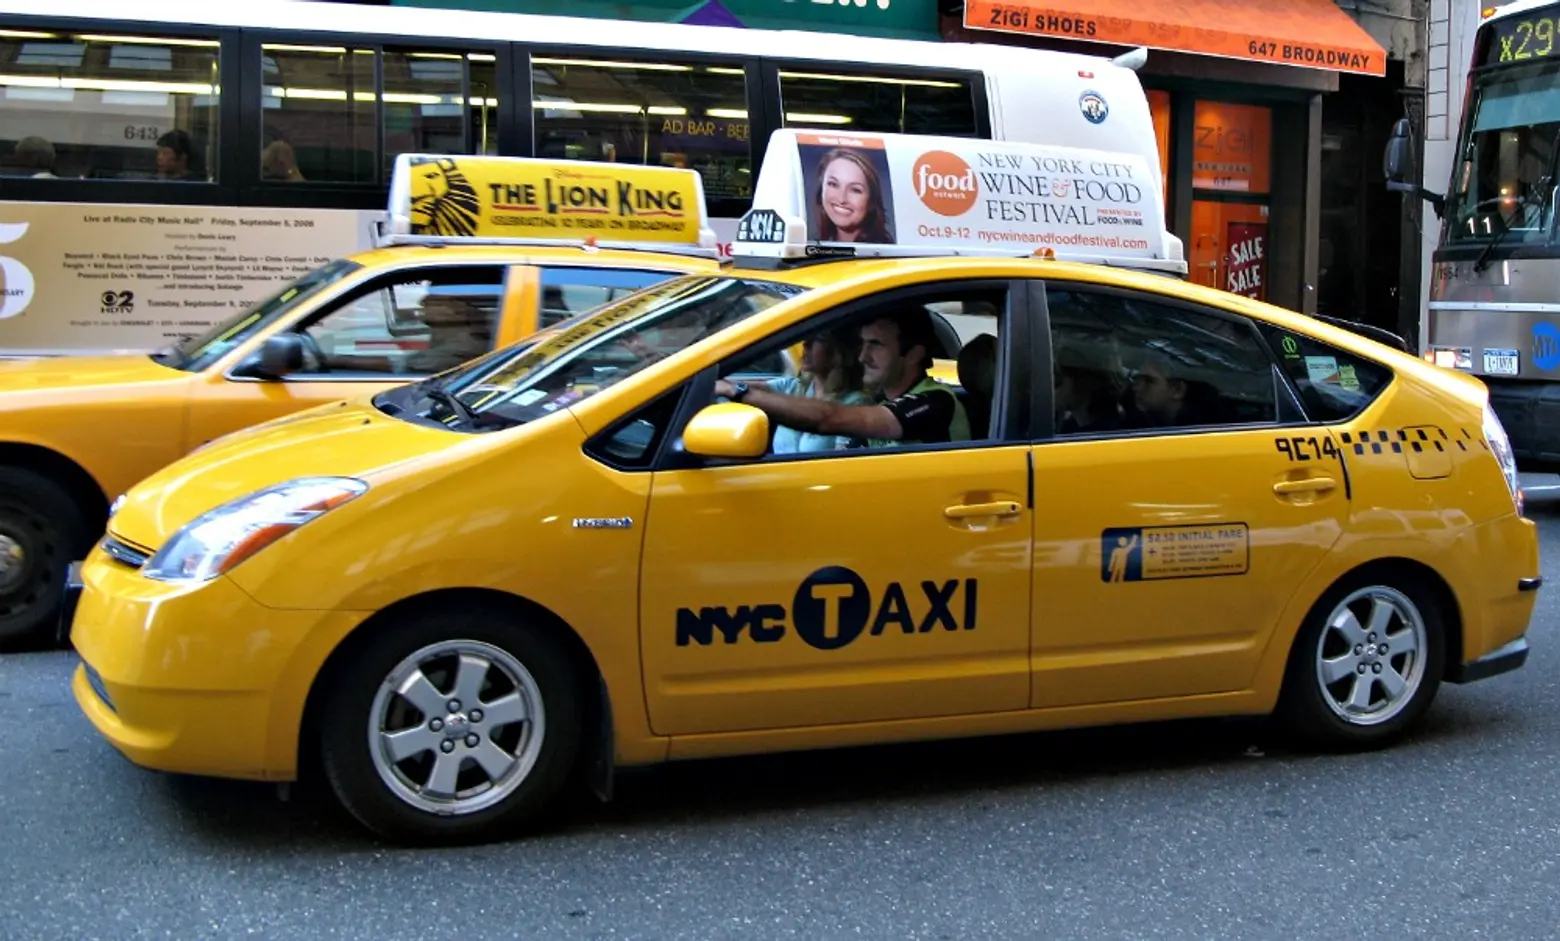 Taxi medallions reach lowest value of the century; Tupac-inspired restaurant popping up this weekend